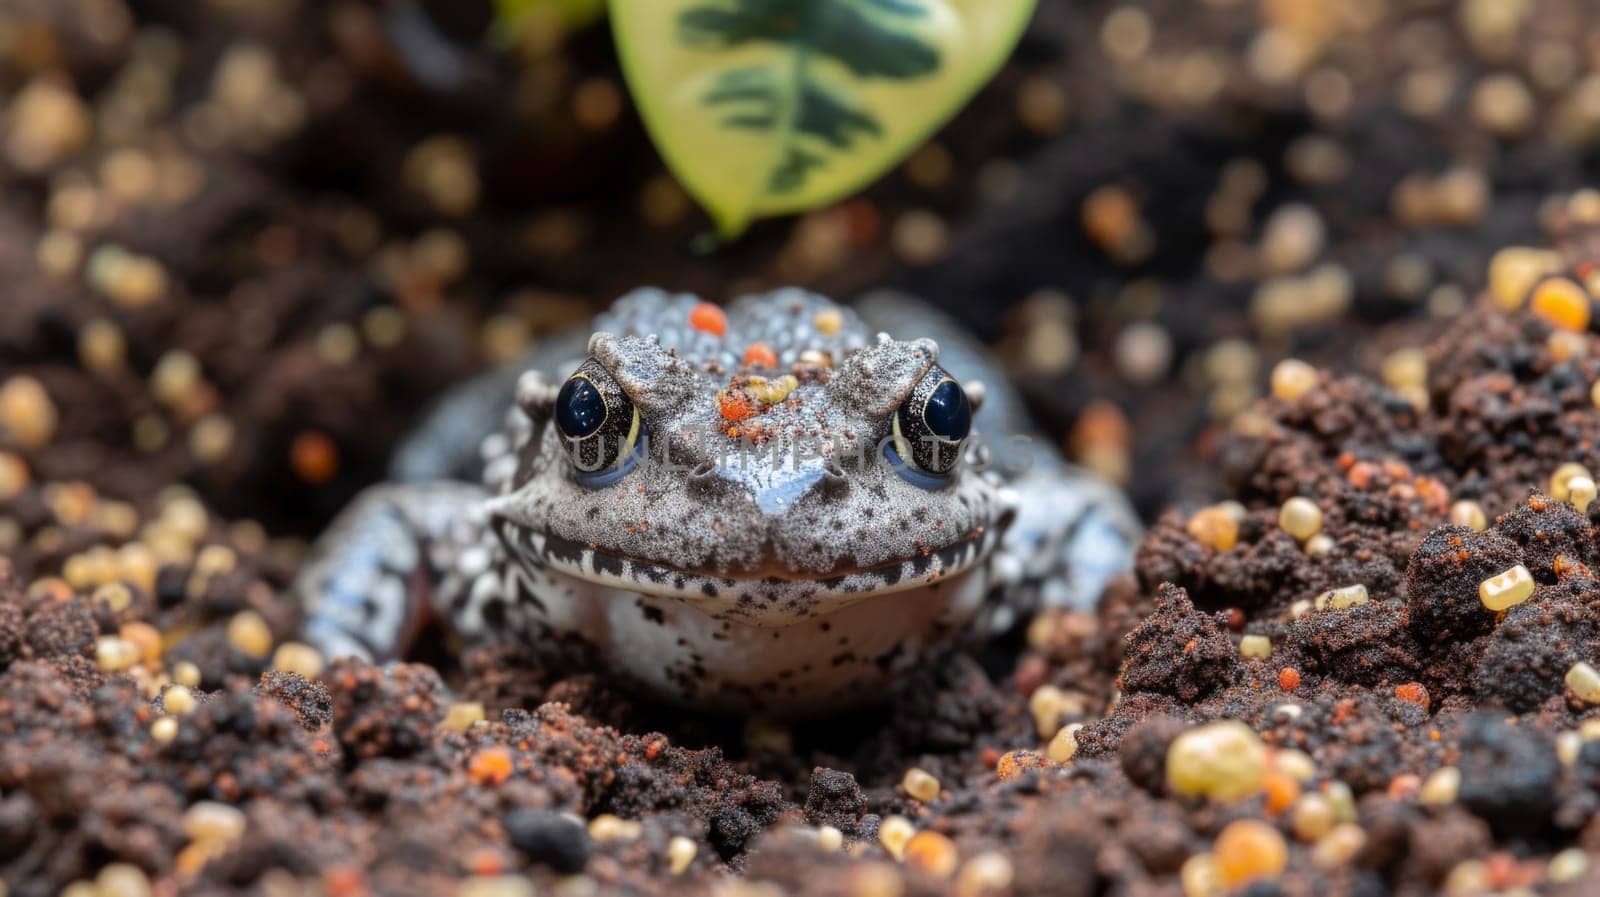 A close up of a frog sitting in the dirt with leaves, AI by starush